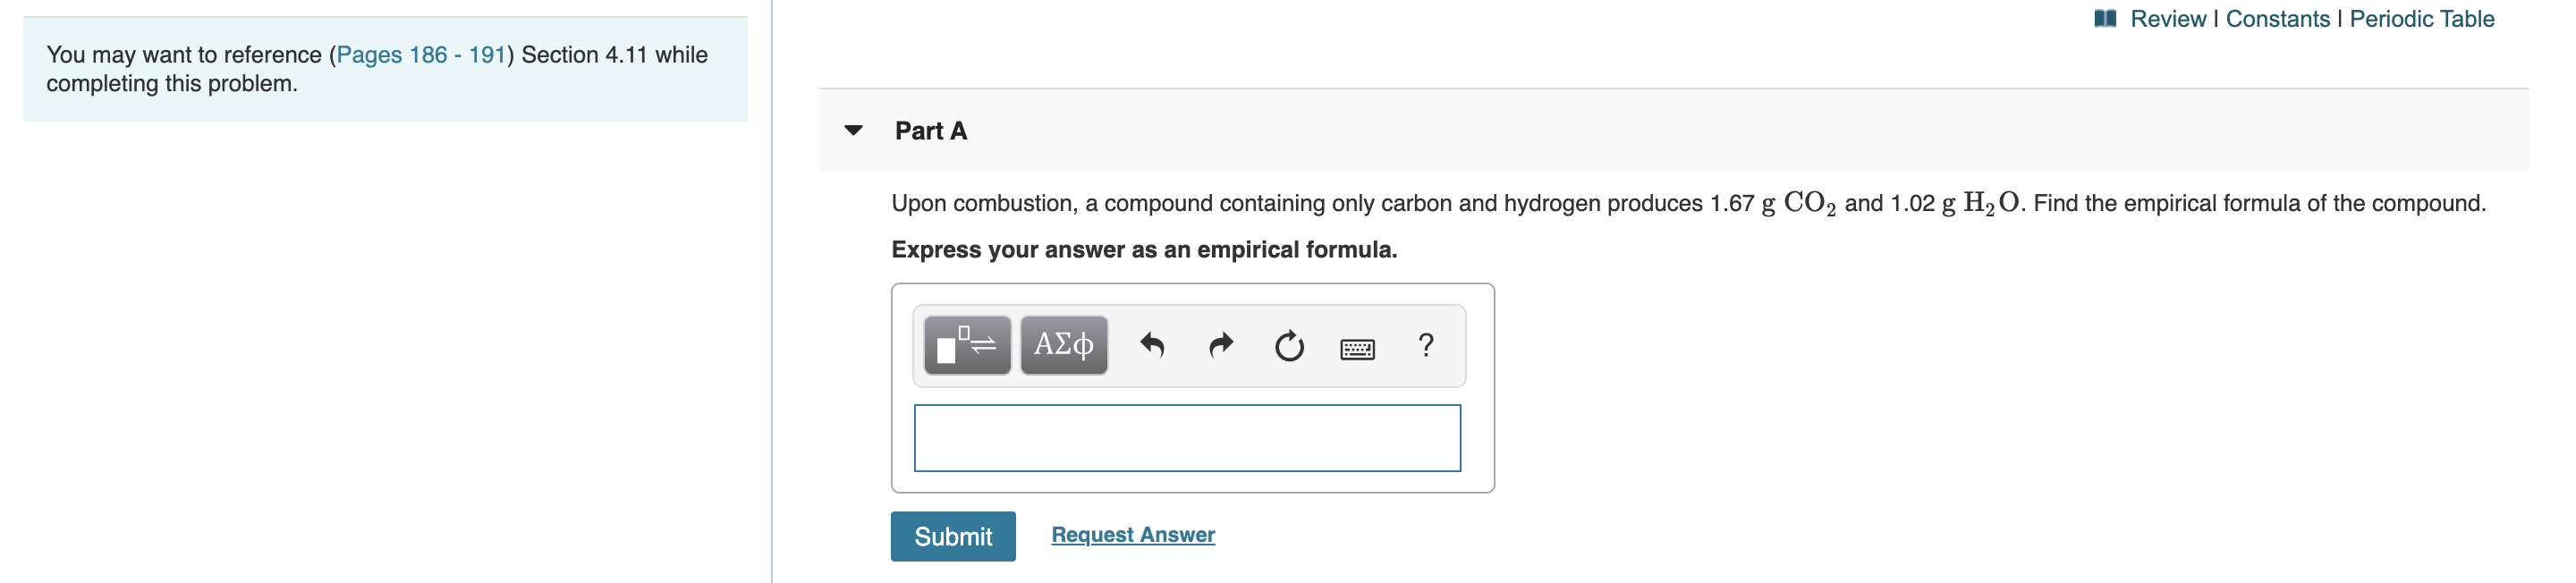 Review I Constants I Periodic Table
You may want to reference (Pages 186 - 191) Section 4.11 while
completing this problem.
Part A
Upon combustion, a compound containing only carbon and hydrogen produces 1.67 g CO2 and 1.02 g H2O. Find the empirical formula of the compound.
Express your answer as an empirical formula.
ΑΣφ
?
E
Request Answer
Submit
